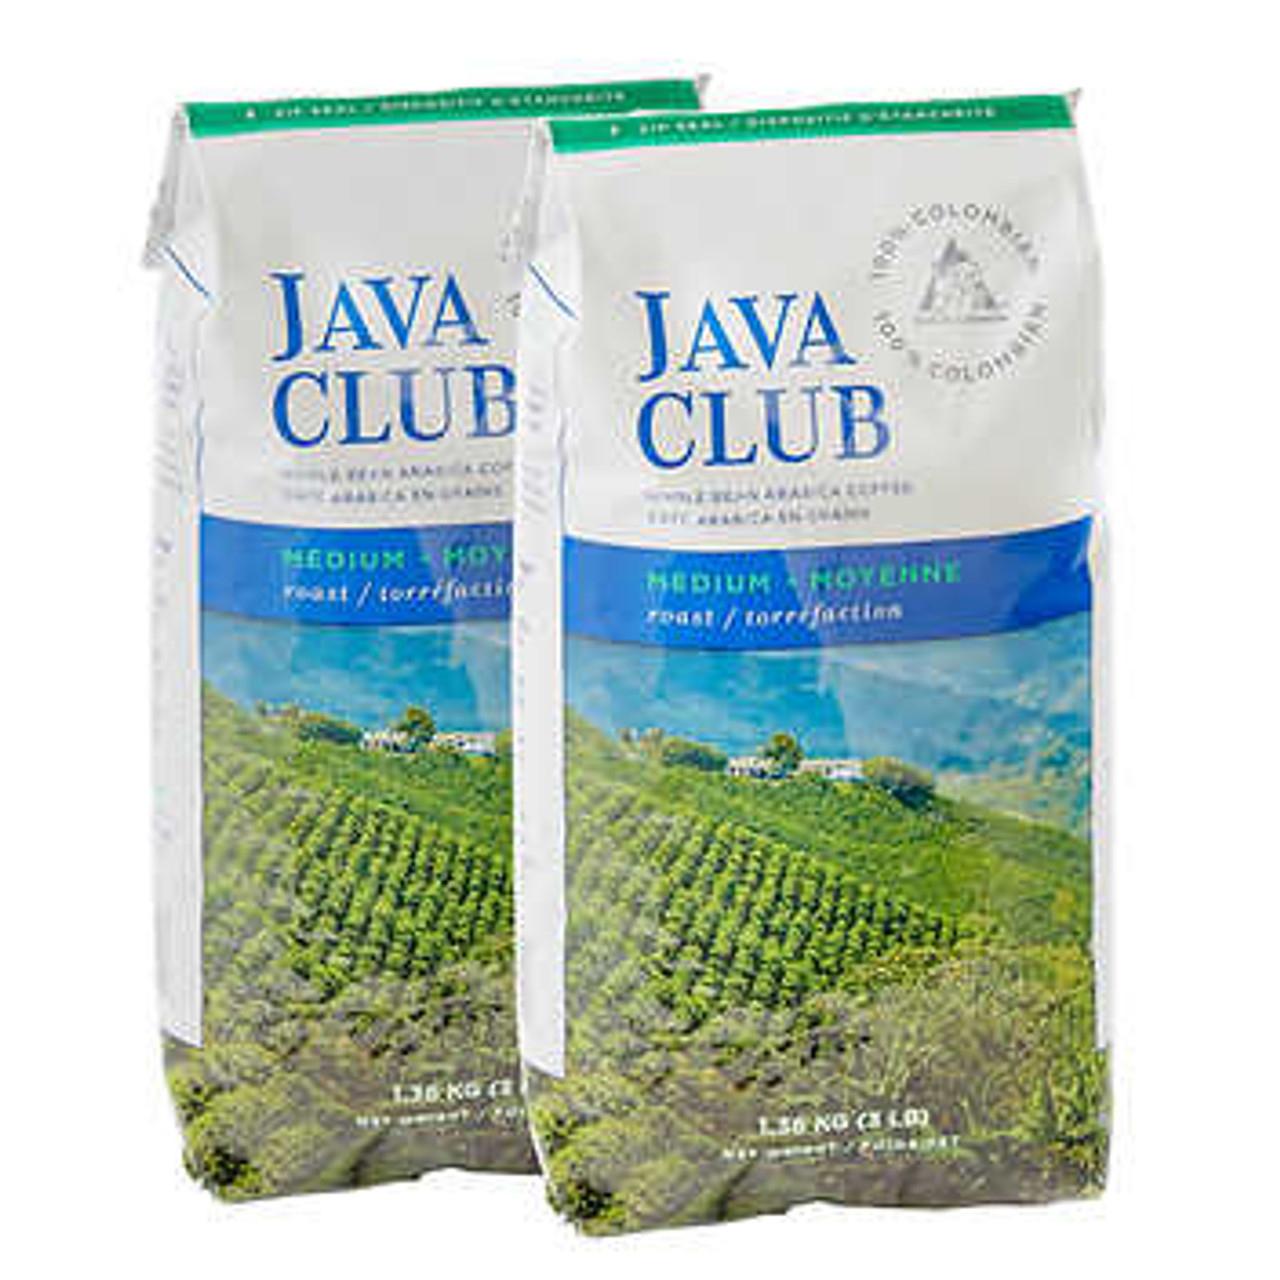 Java Club 100% Colombian Whole Bean Arabica Coffee - 2 x 1.36 kg - Pure Colombian Excellence in Every Cup- Chicken Pieces